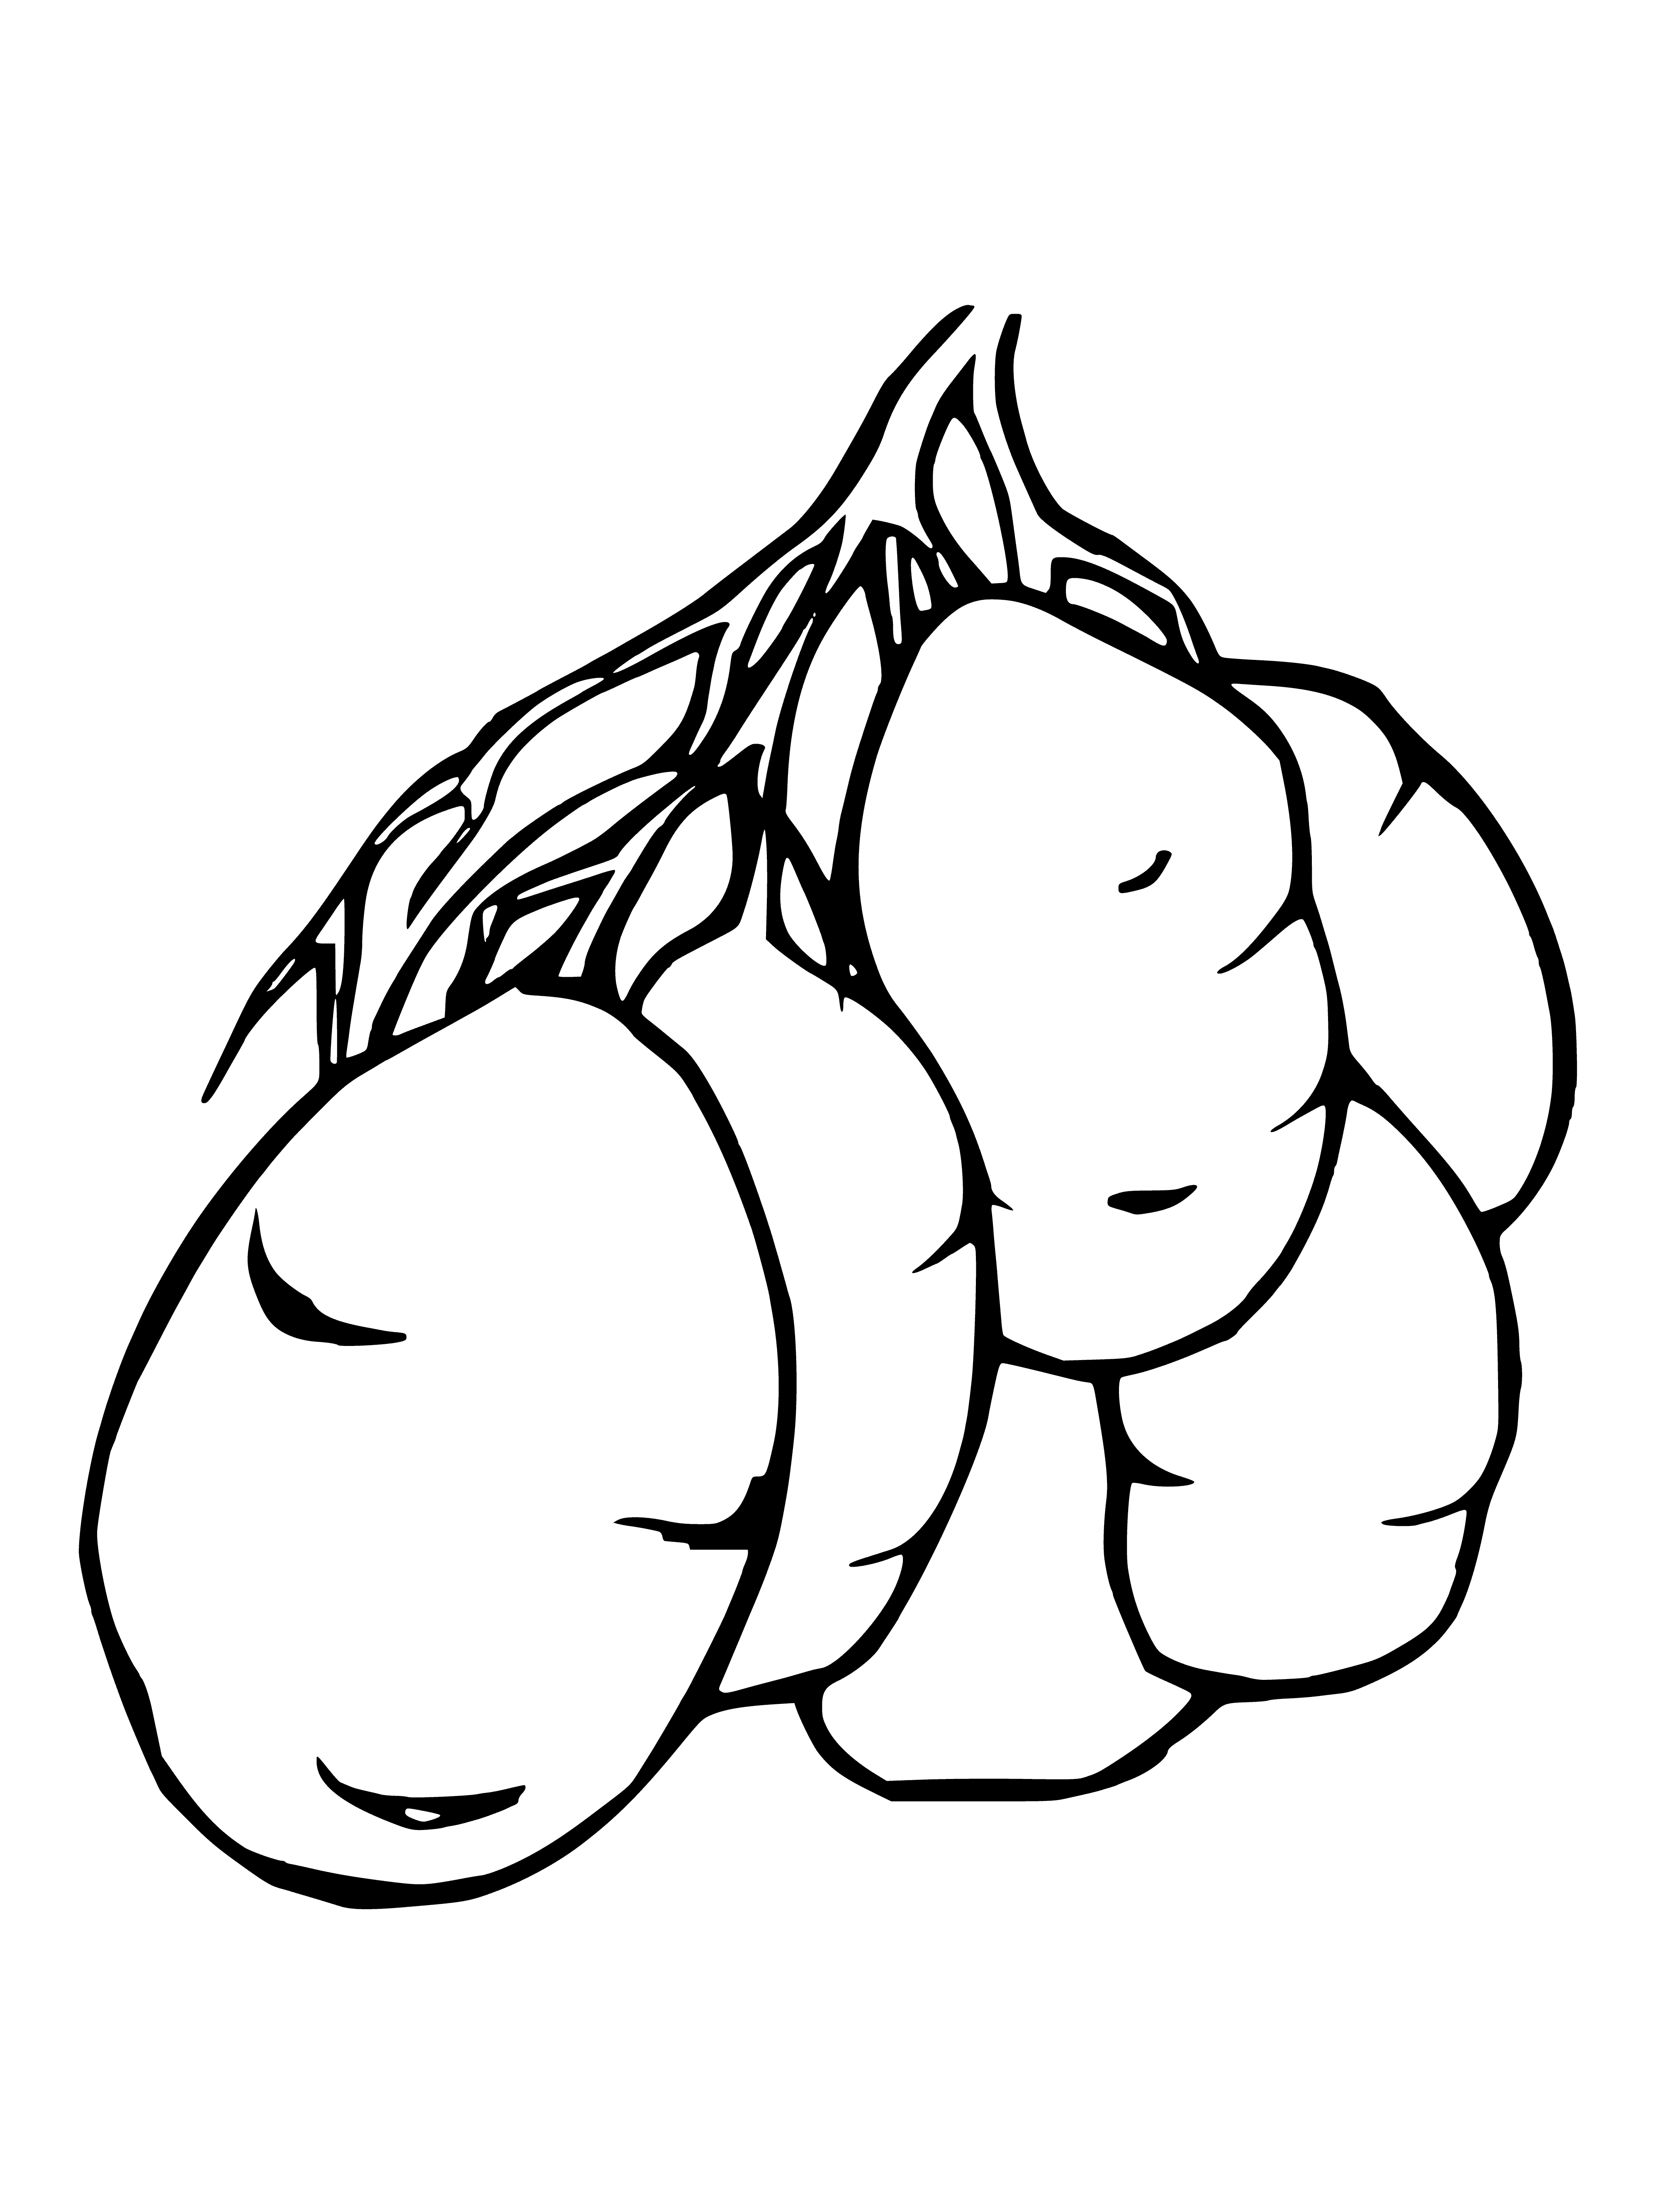 coloring page: Potatoes: long & slender; light brown, sm. bumps & points; slightly curved.